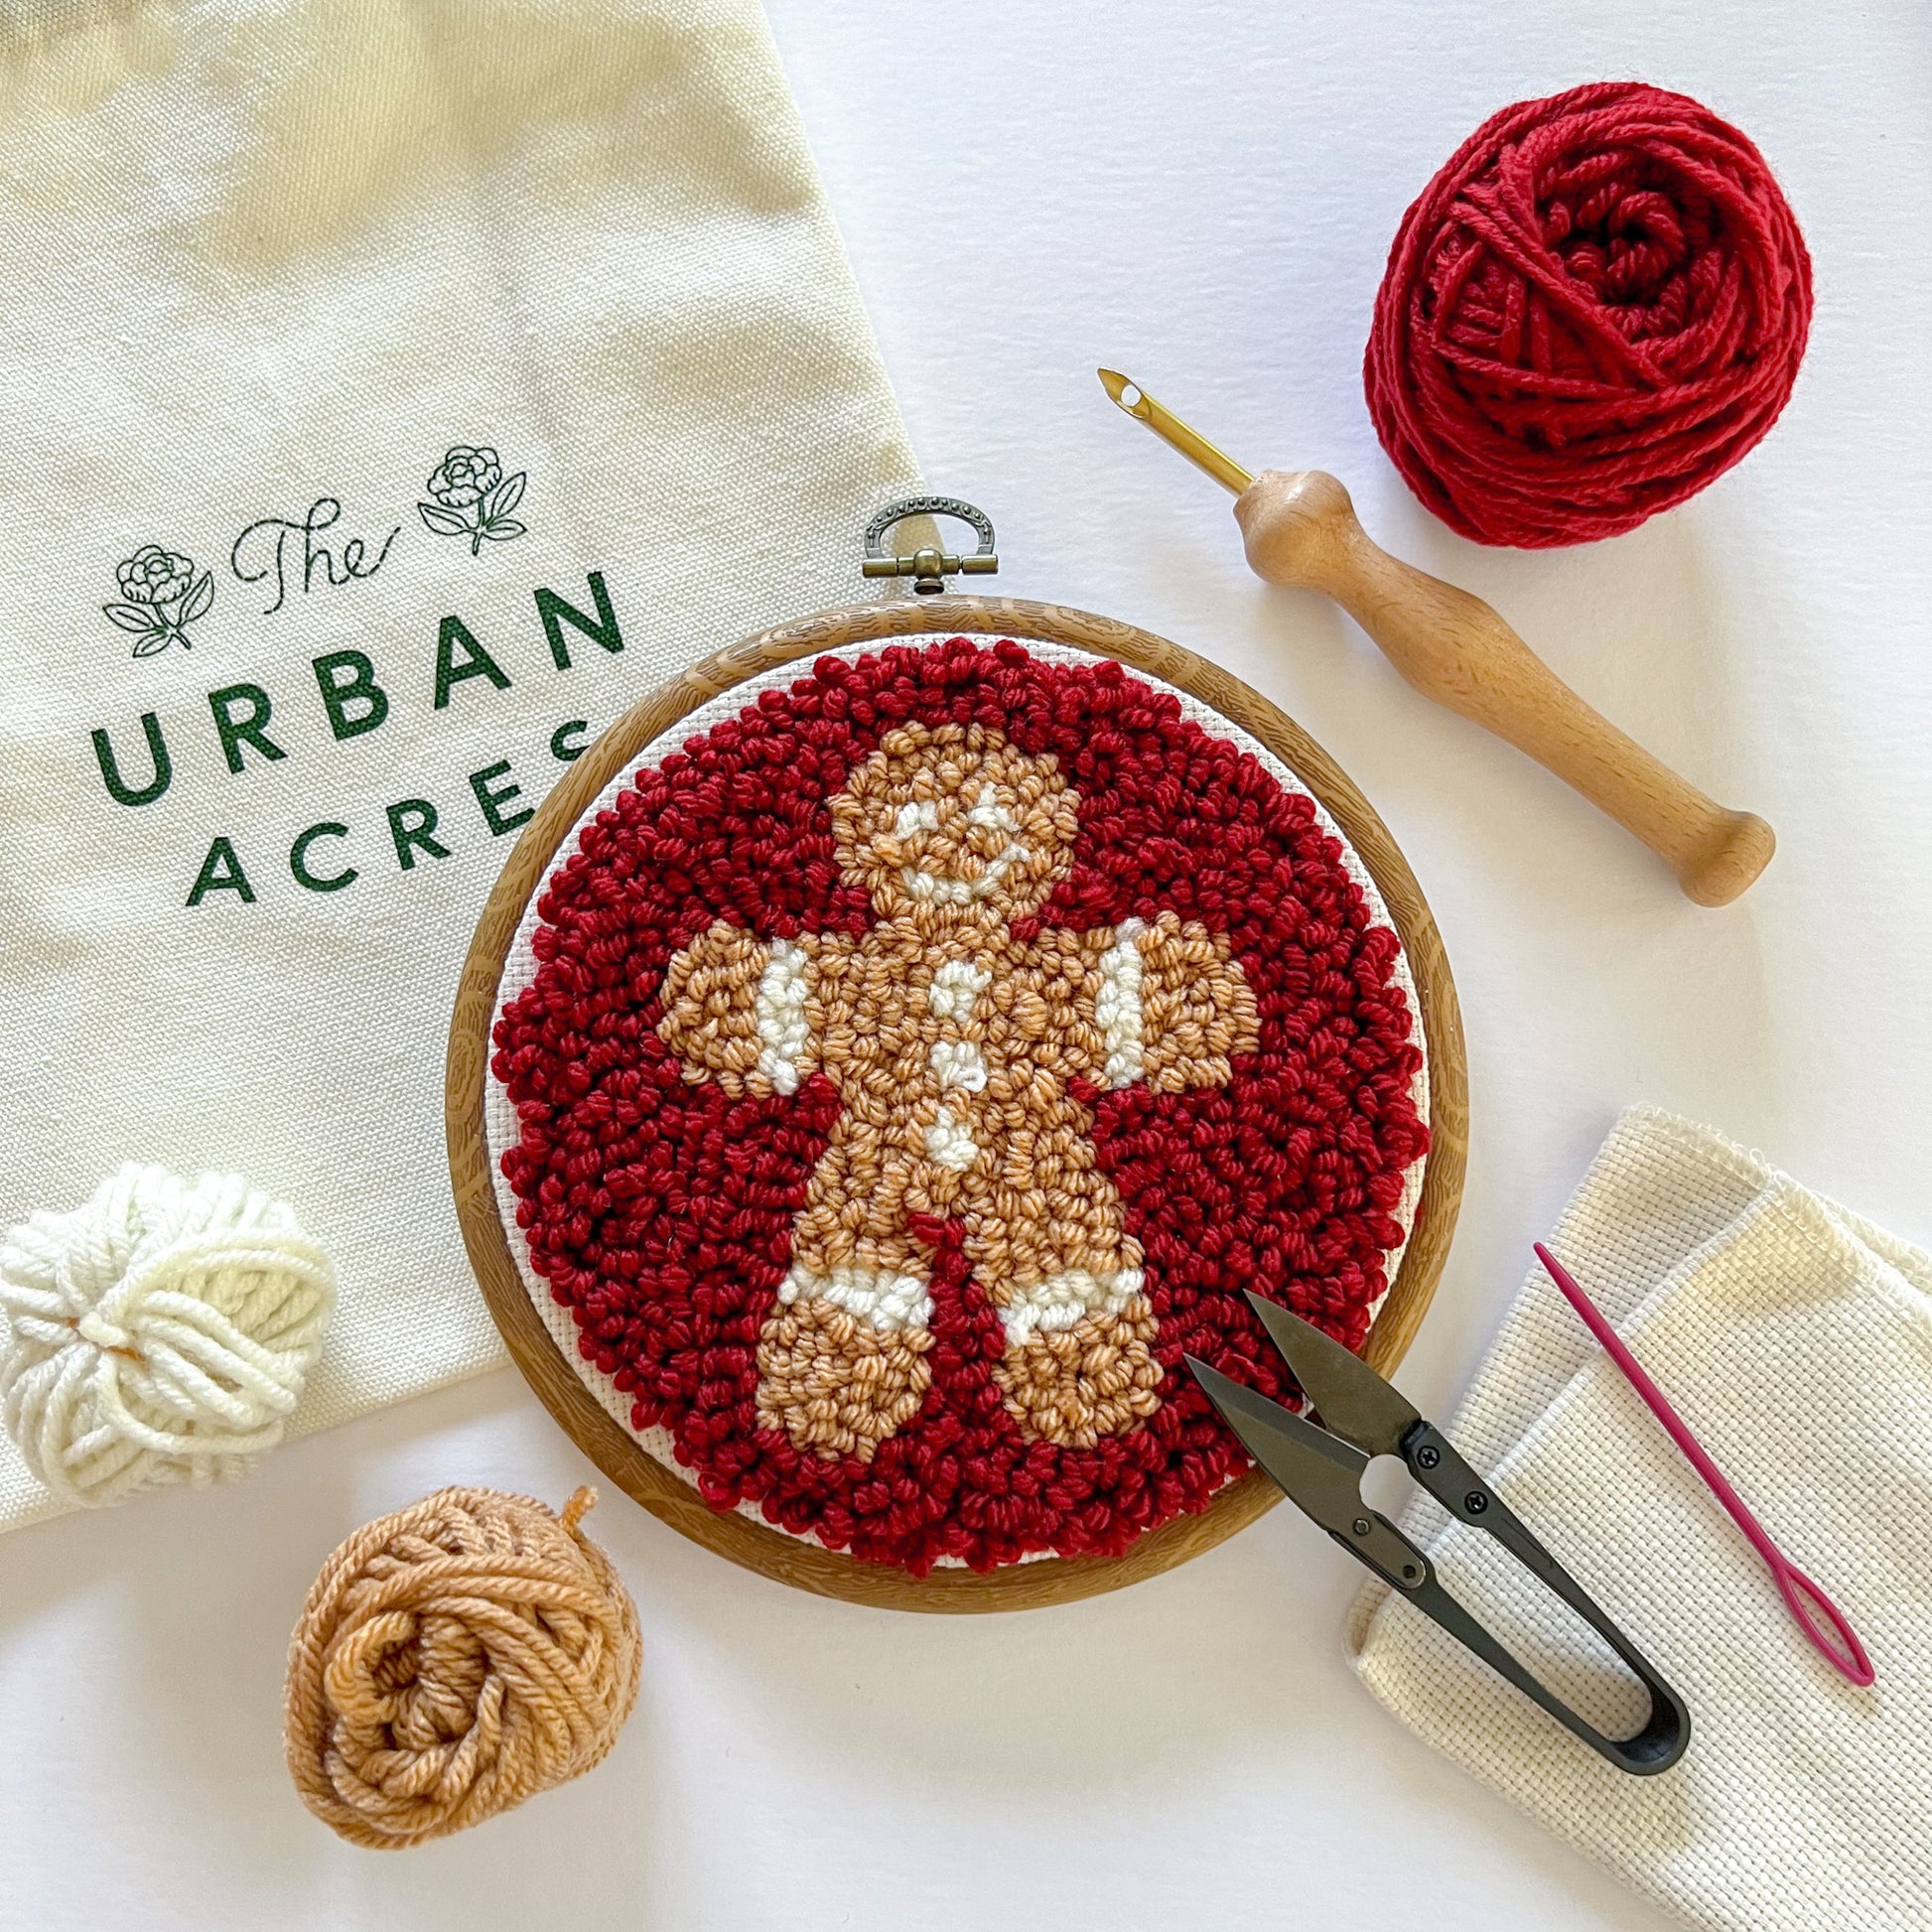 Punch Needle Ornament Guide – The Urban Acres